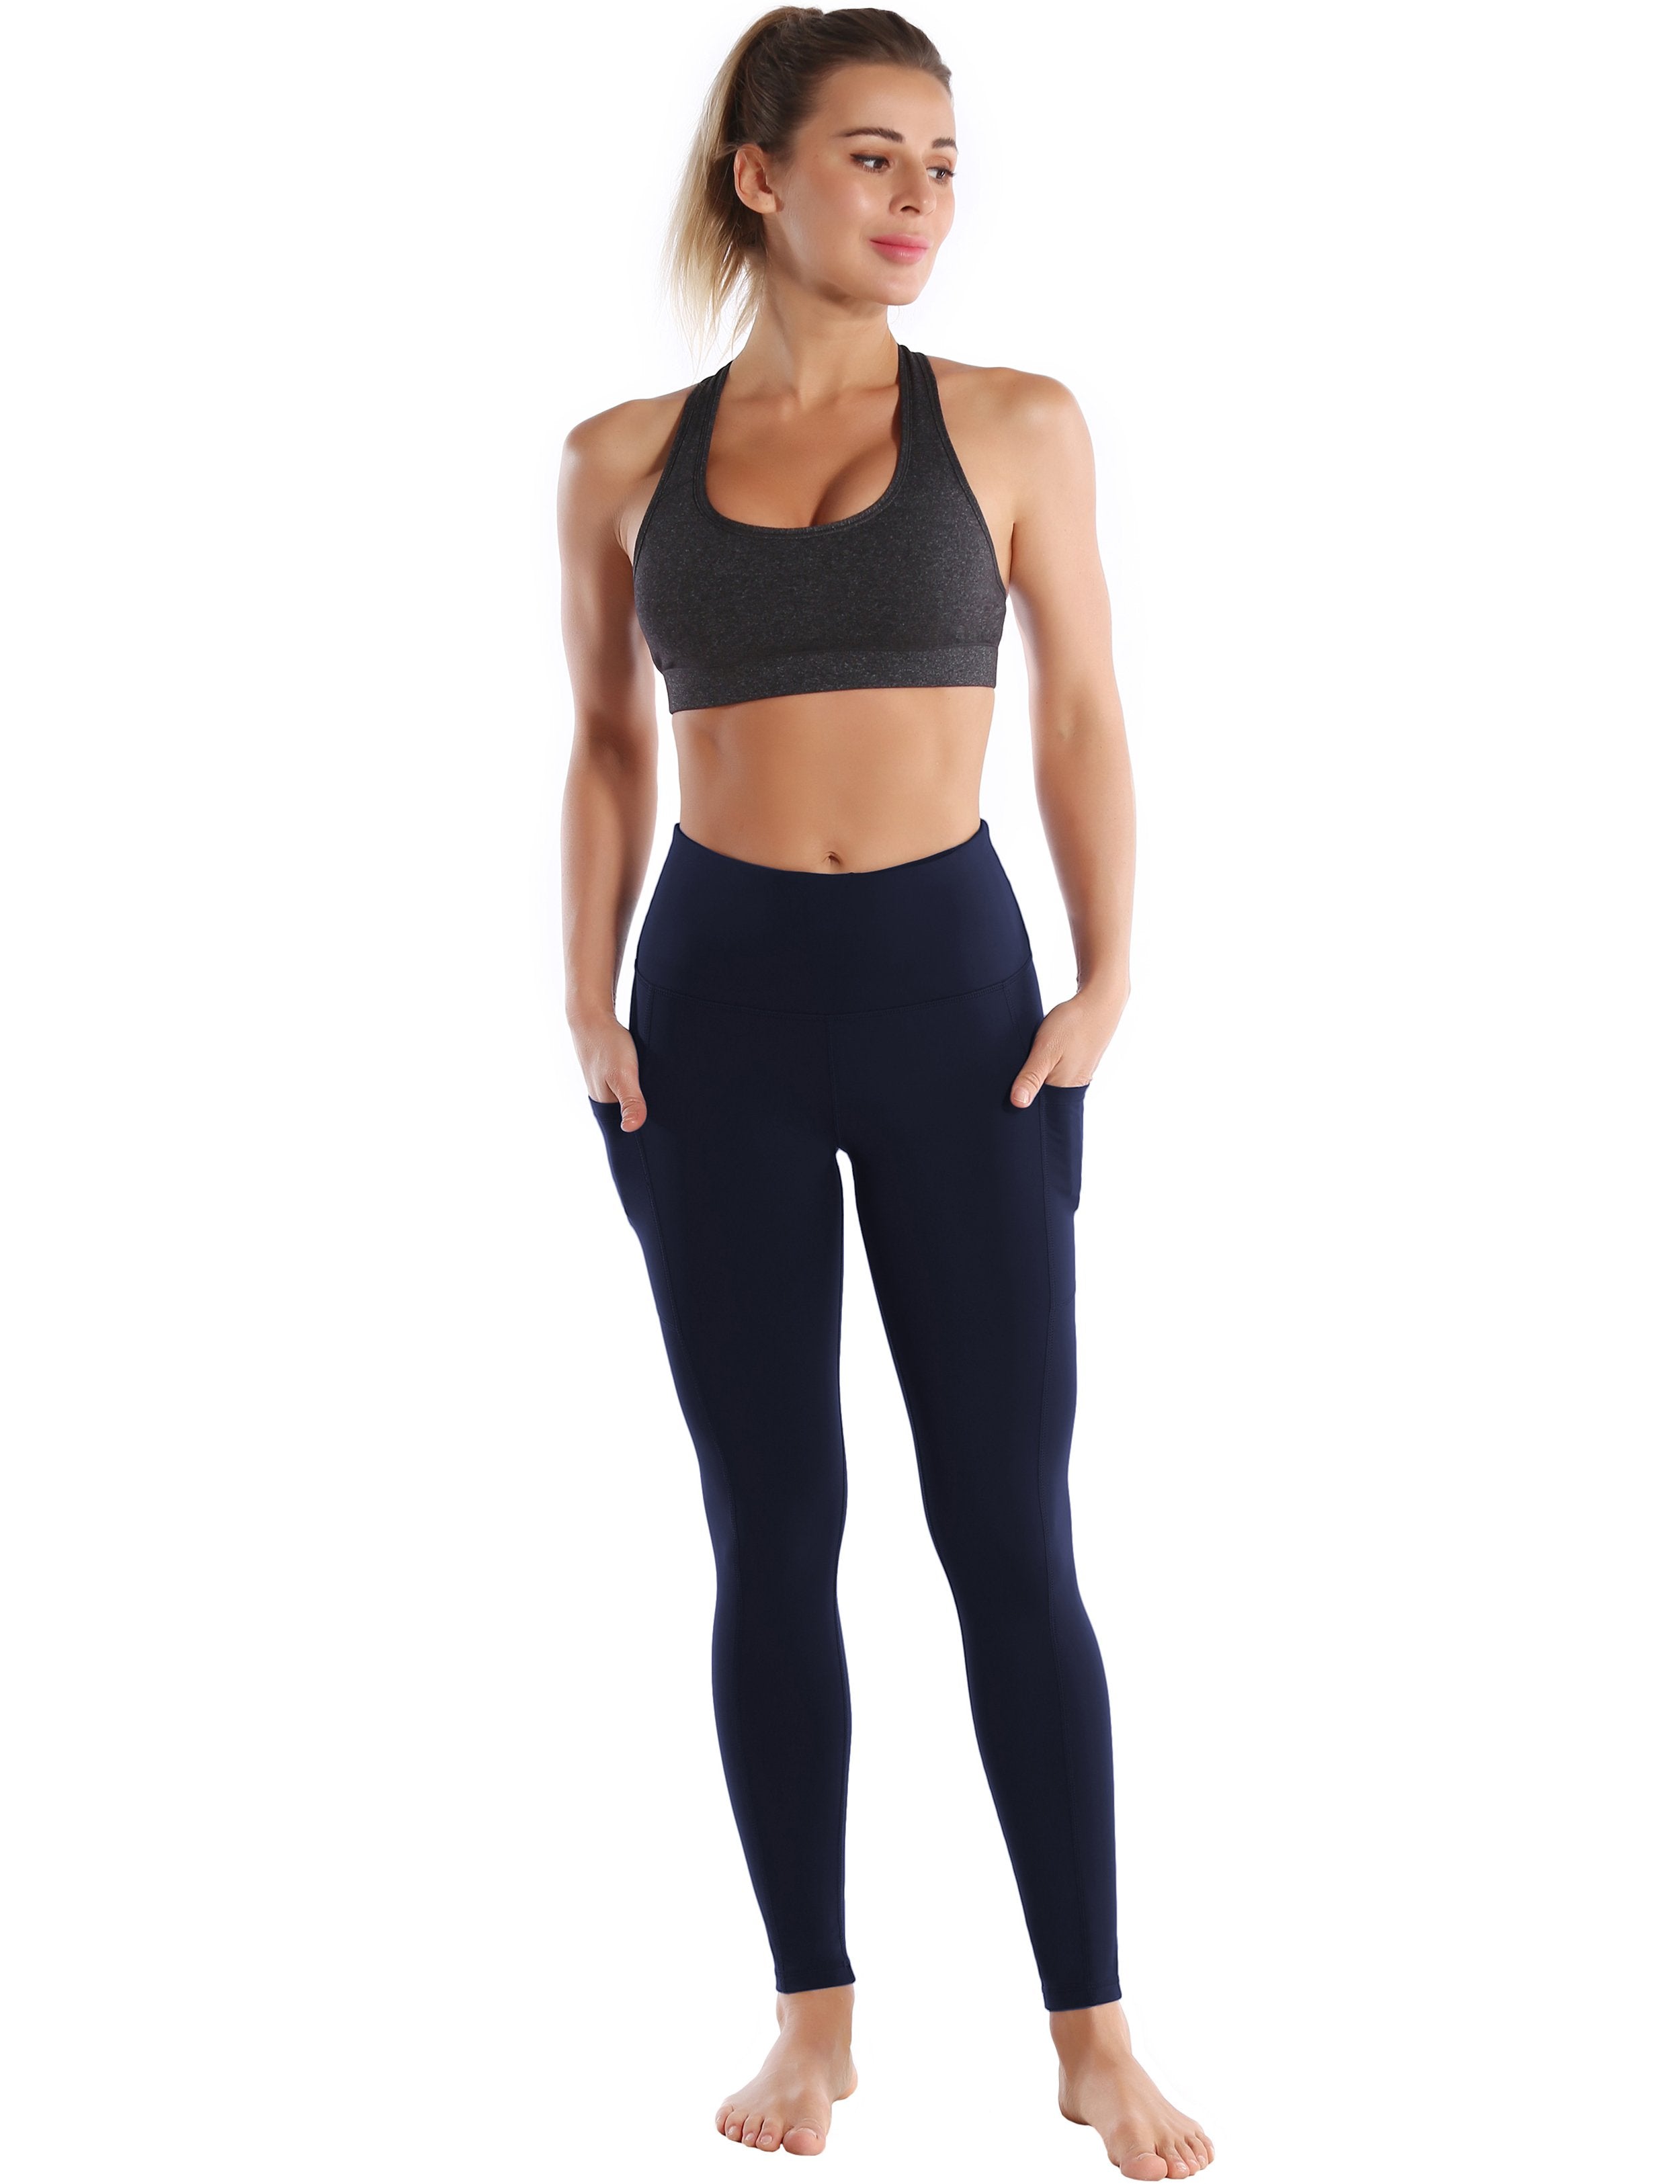 Hip Line Side Pockets Yoga Pants darknavy Sexy Hip Line Side Pockets 75%Nylon/25%Spandex Fabric doesn't attract lint easily 4-way stretch No see-through Moisture-wicking Tummy control Inner pocket Two lengths